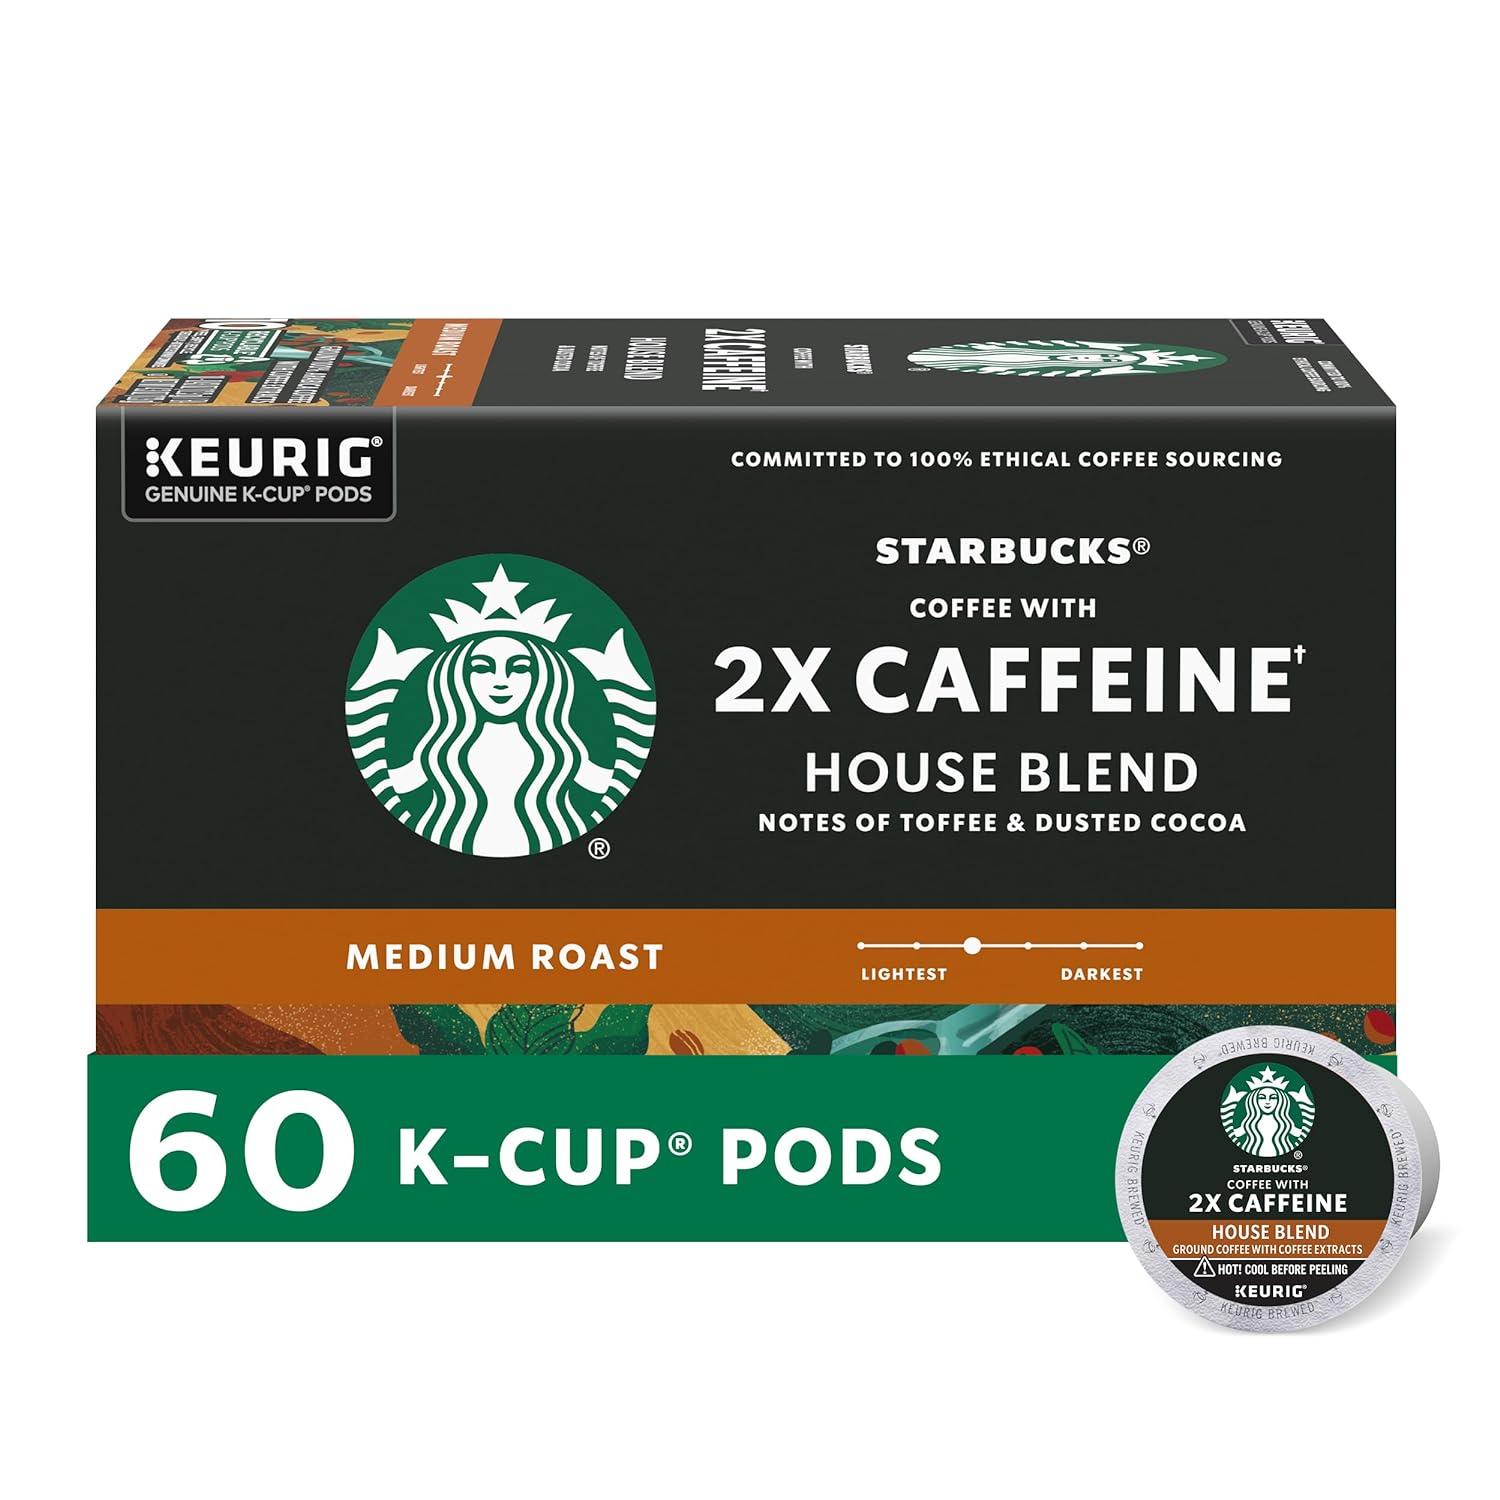 Starbucks K-Cup Coffee Pods, Medium Roast Coffee With 2X Caffeine House Blend For Keurig Coffee Makers, 100% Arabica, 6 Boxes (60 Pods Total)